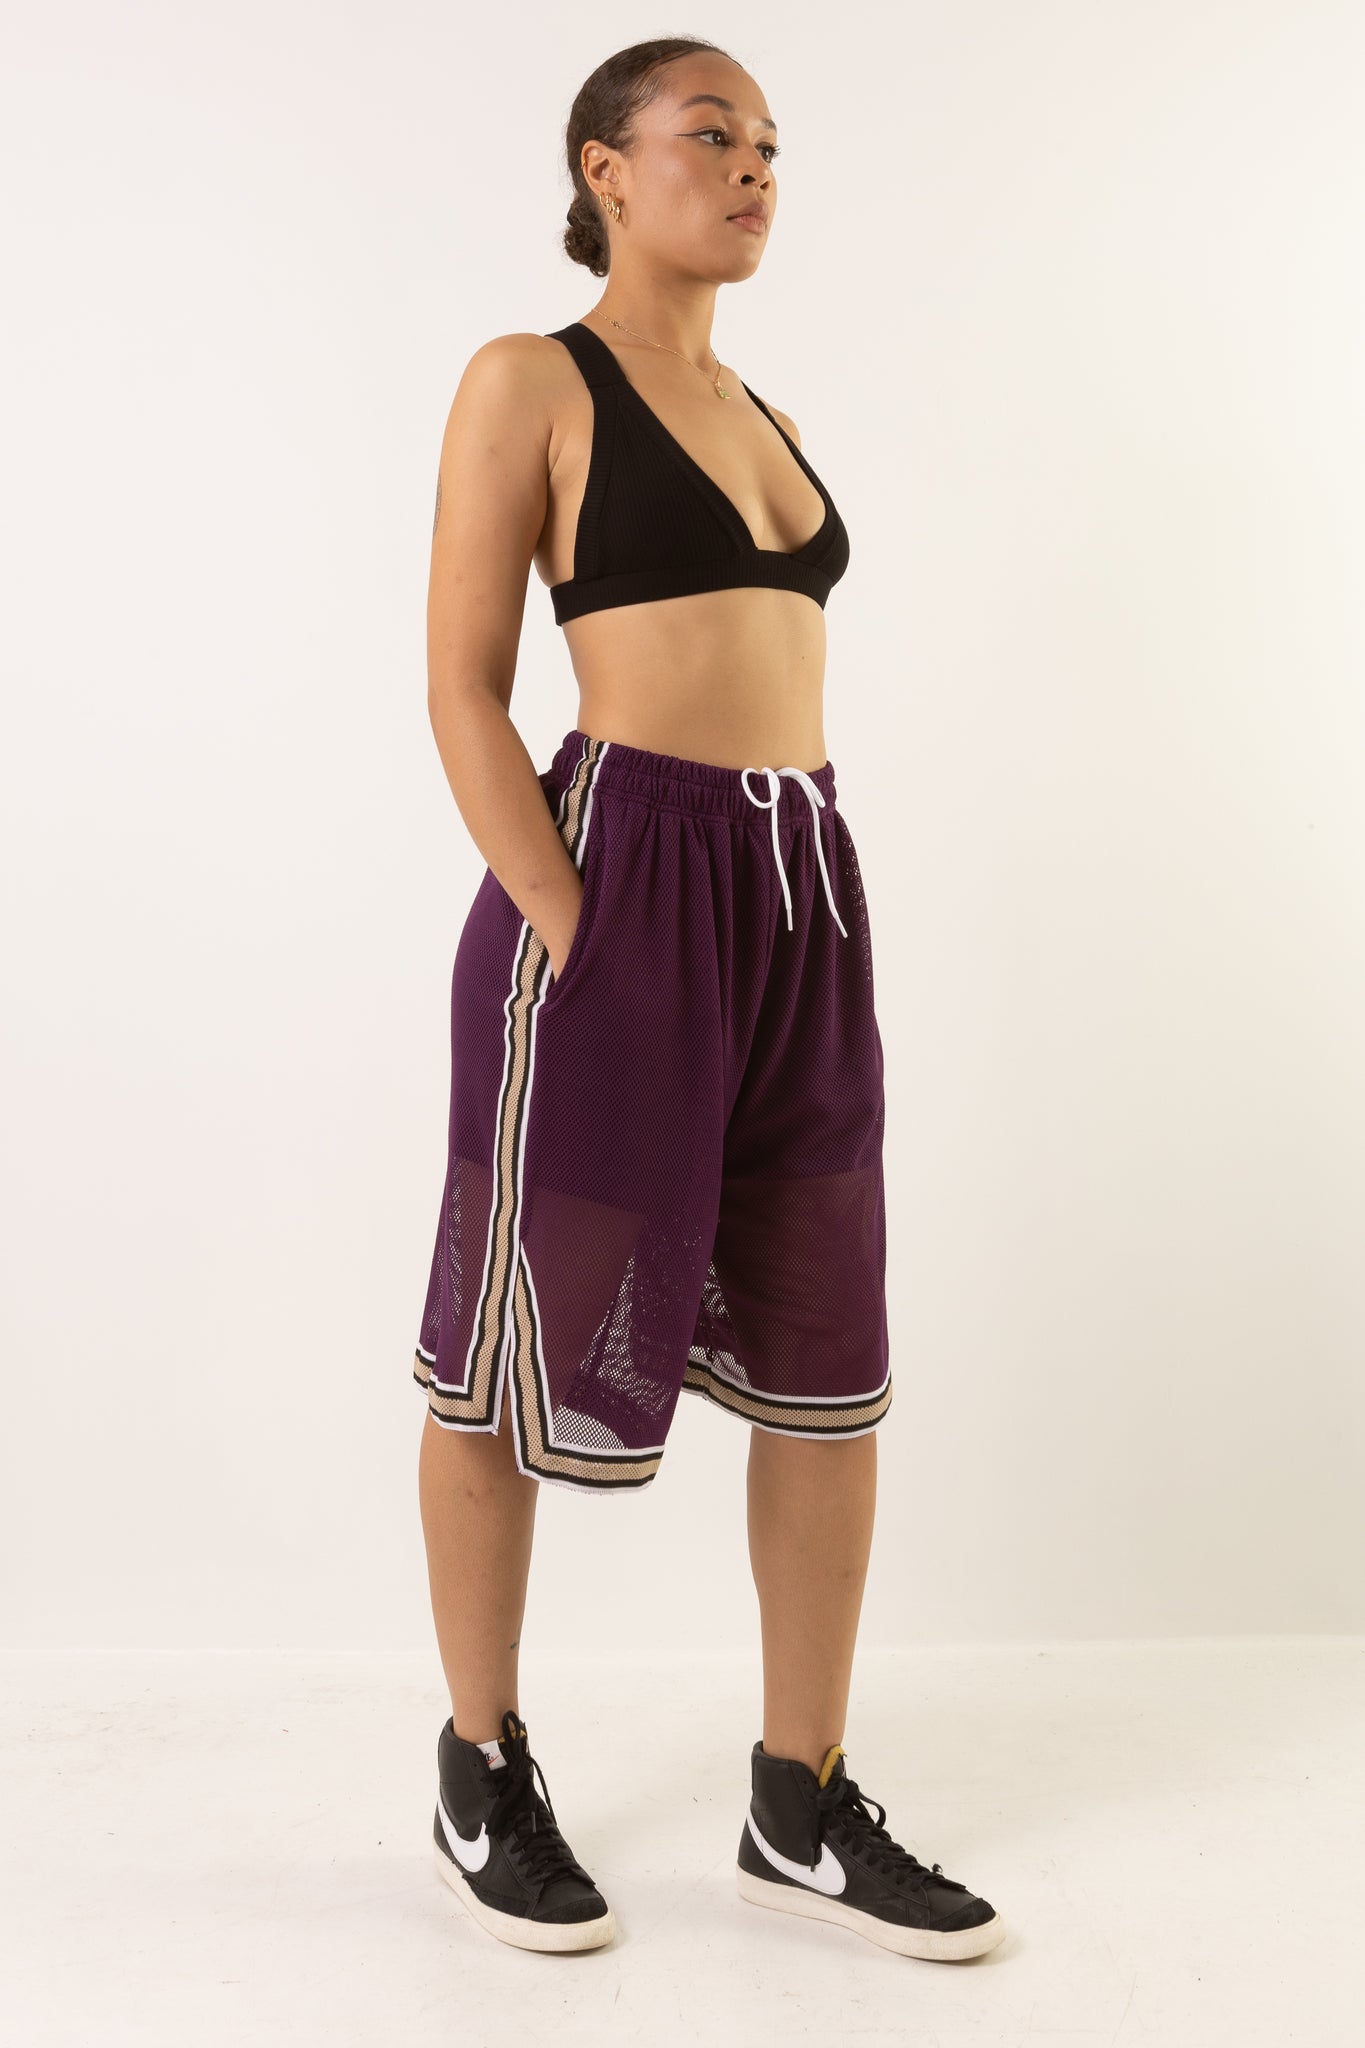 CROWN BASKETBALL SHORTS - MERCY HOUSE